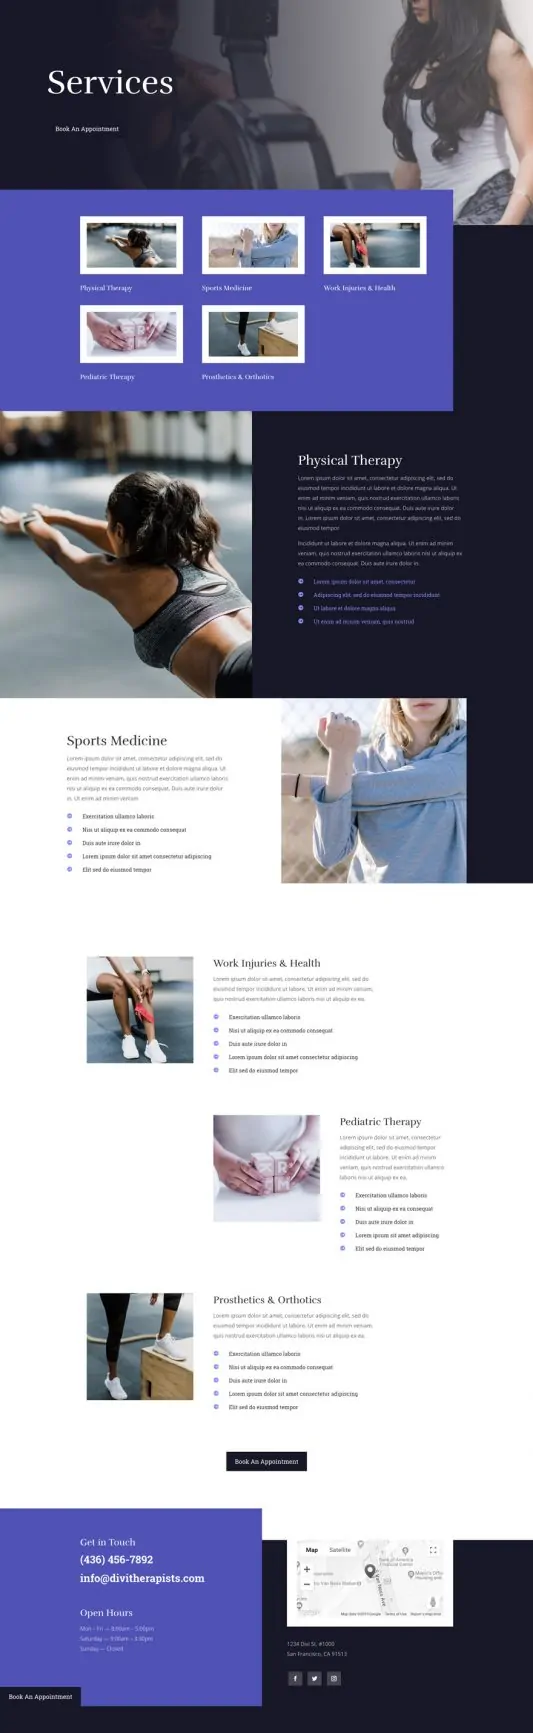 Physical Therapy Services Page Style